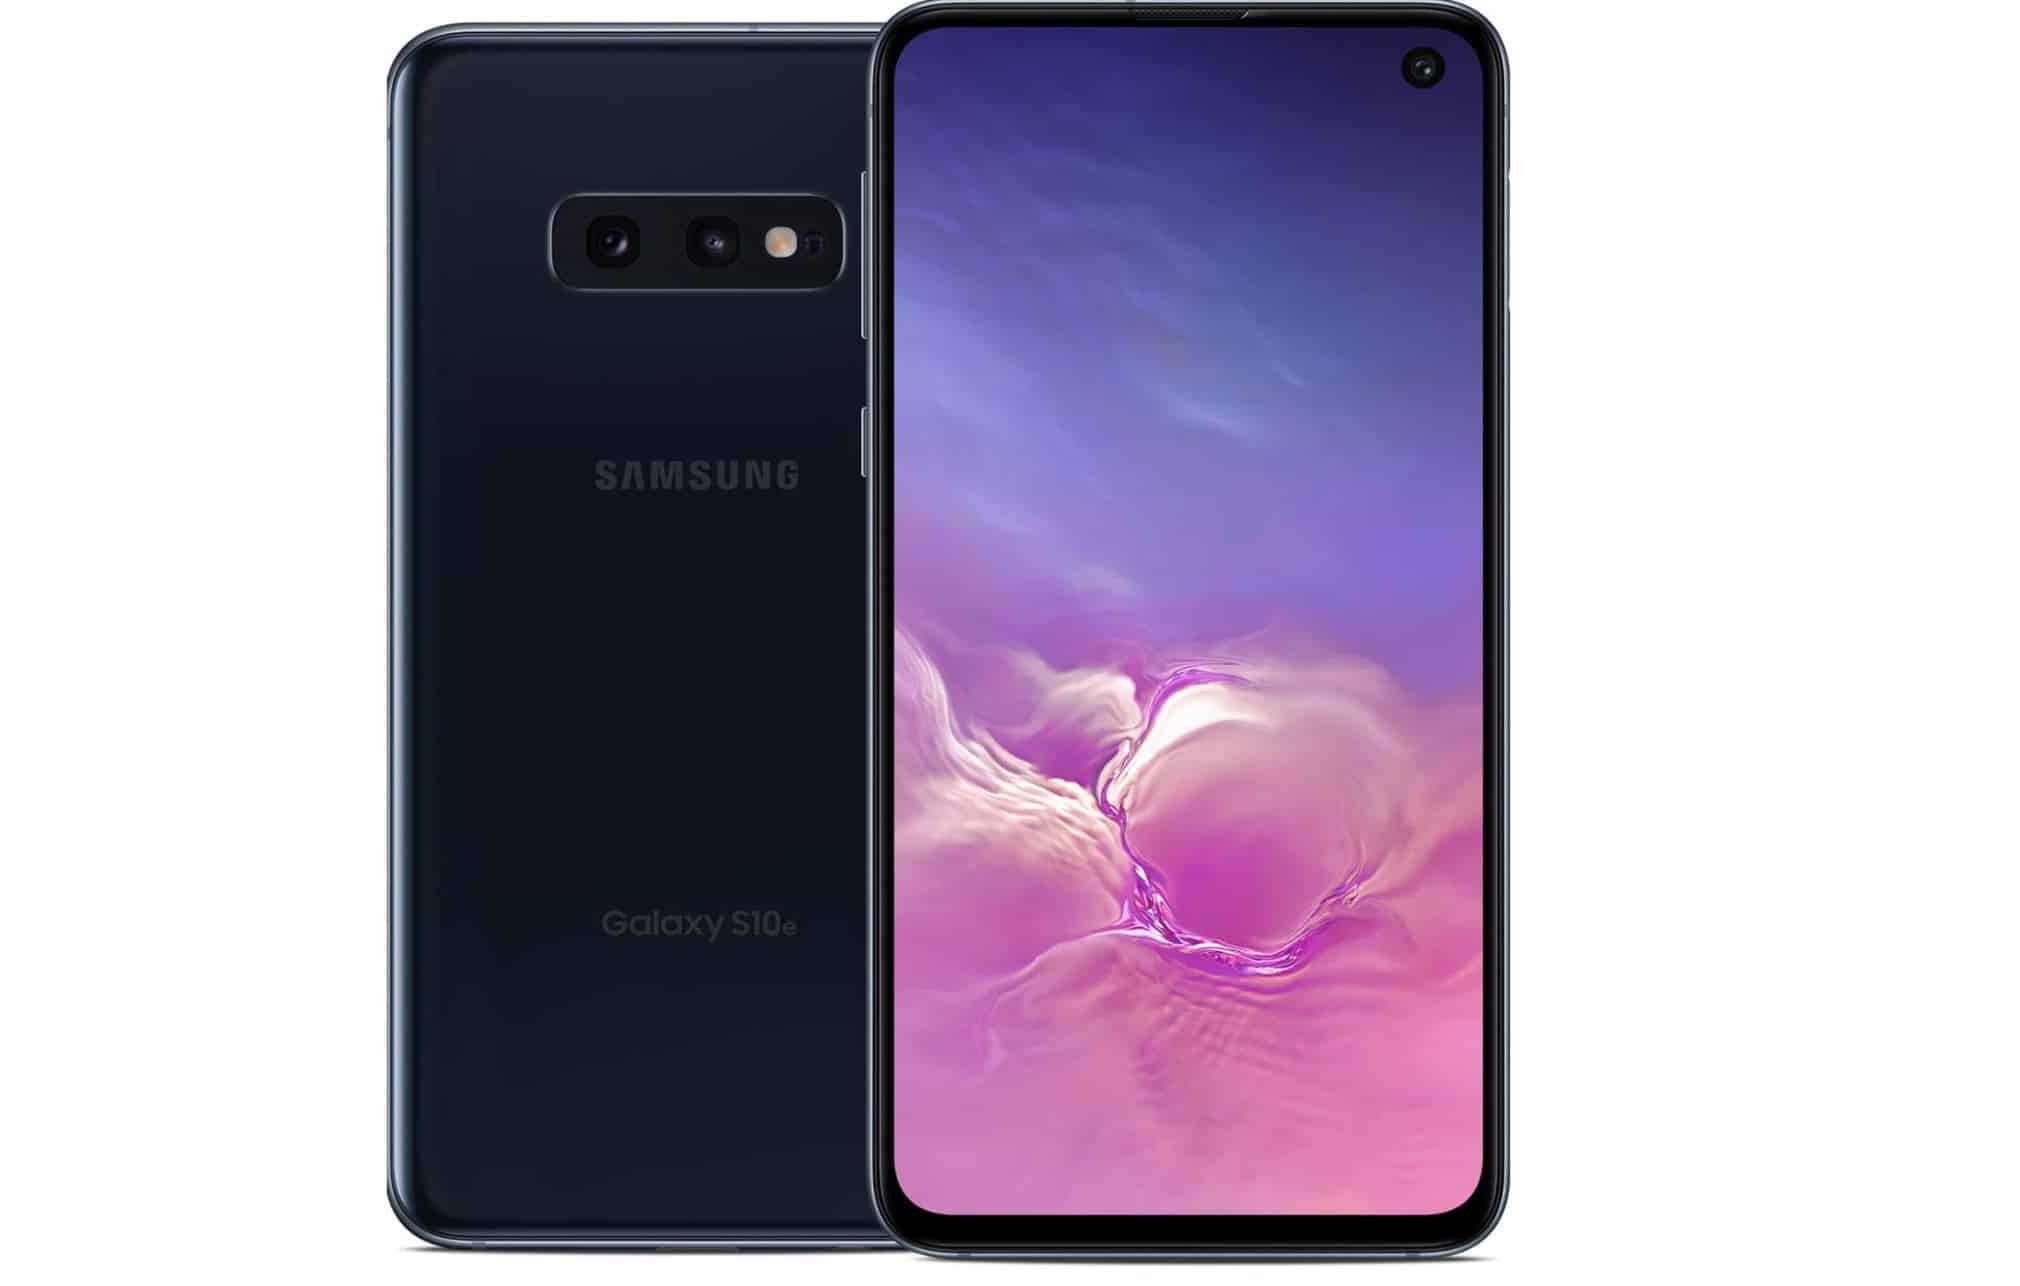 Great Deal: Unlocked Samsung Galaxy S10e now available for $499 (was $749)